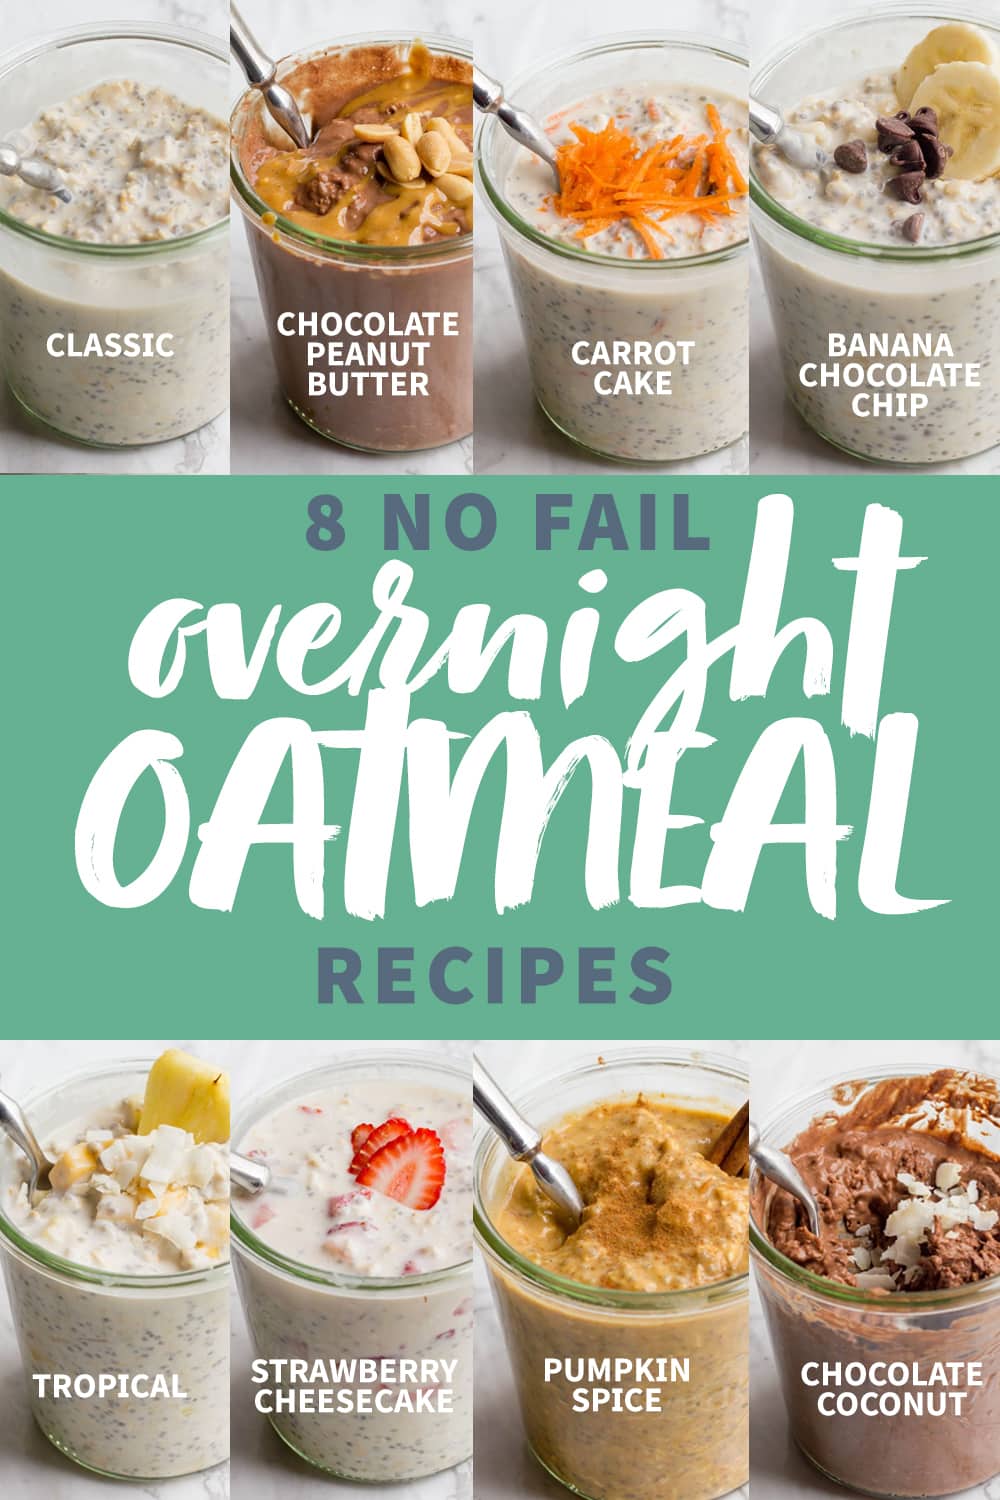 How to Make Overnight Oats + 15 Easy Recipes | Wholefully